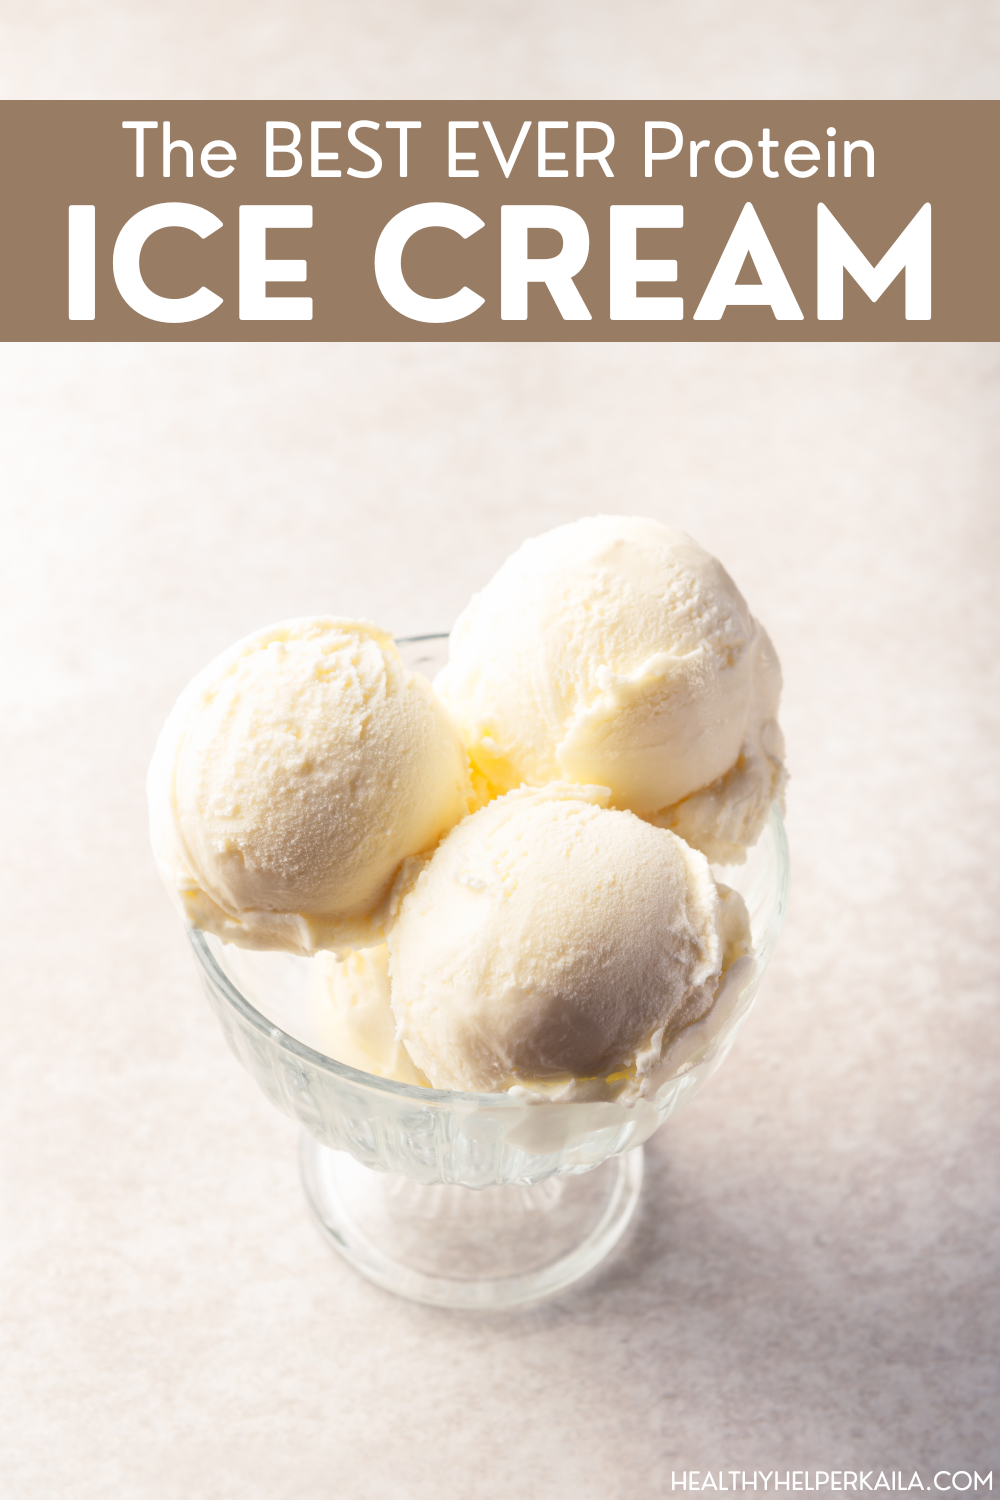 Your new GO-TO recipe for the most delicious & voluminous bowl of protein ice cream you'll ever have! Low-cal, no sugar added, and minimal carbs. This ice cream recipe will be your new favorite healthy treat to make for dessert.